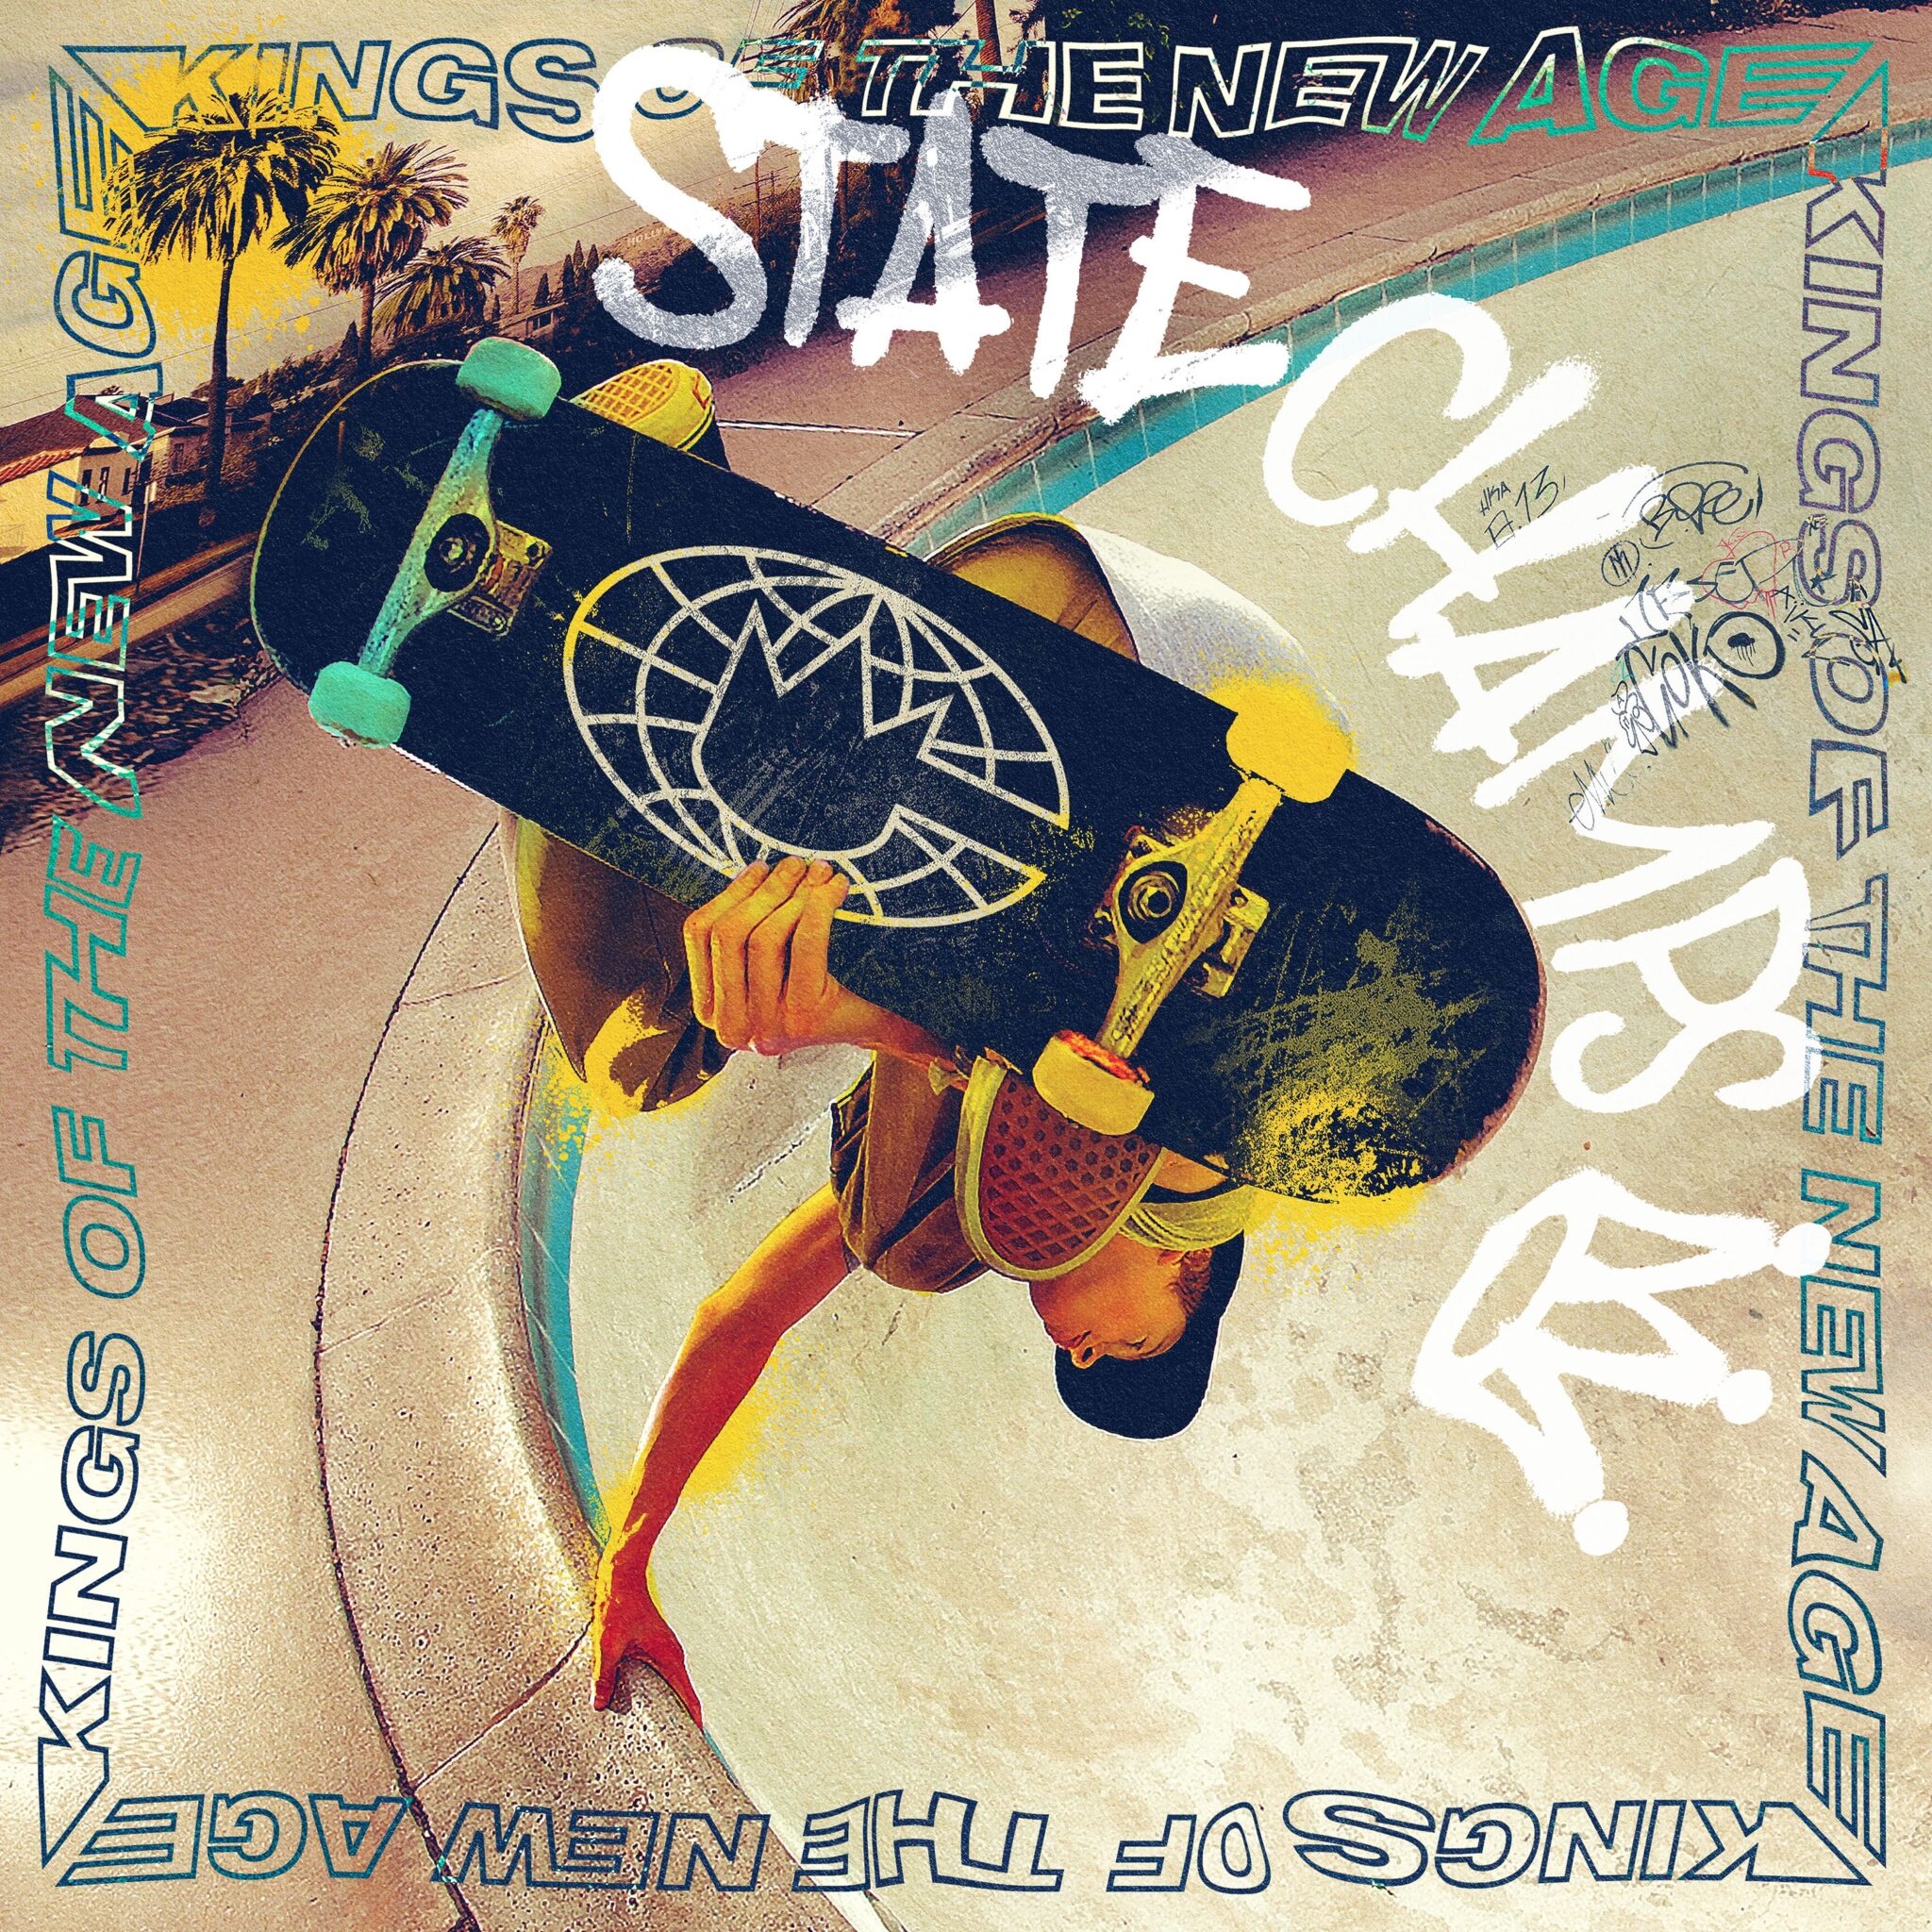 State Champs. "Kings of the New Age" spelled out across each side of the frame. A ground-to-sky shot of a skateboarder gripping his board during a jump.